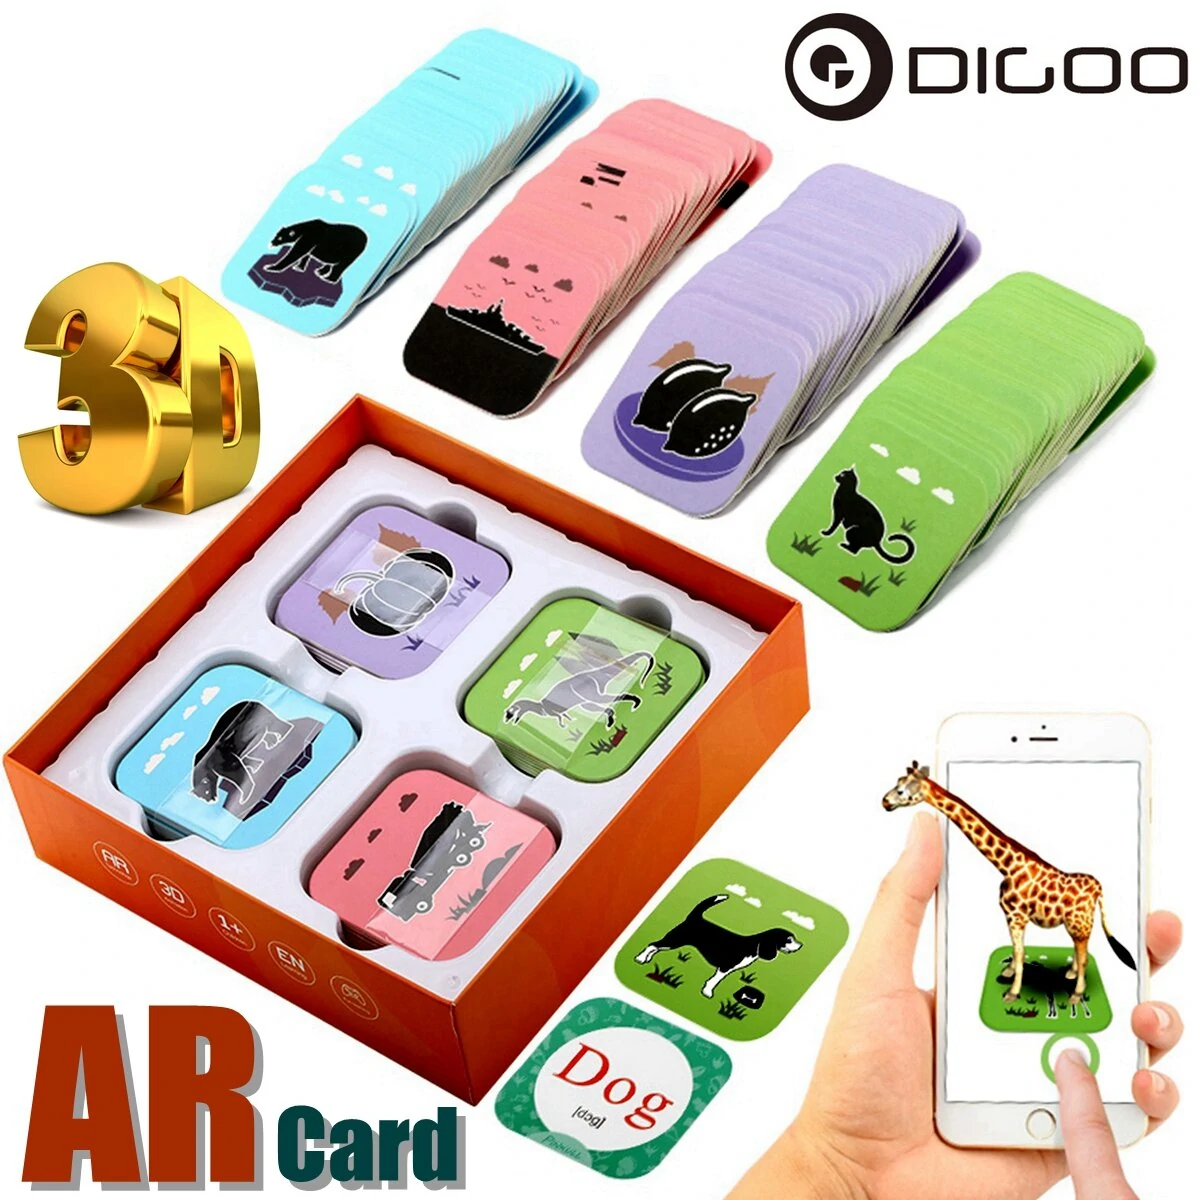 Digoo bb-cq1 ar education card 108 pcs early learning interactive educational kids 3d speelgoed